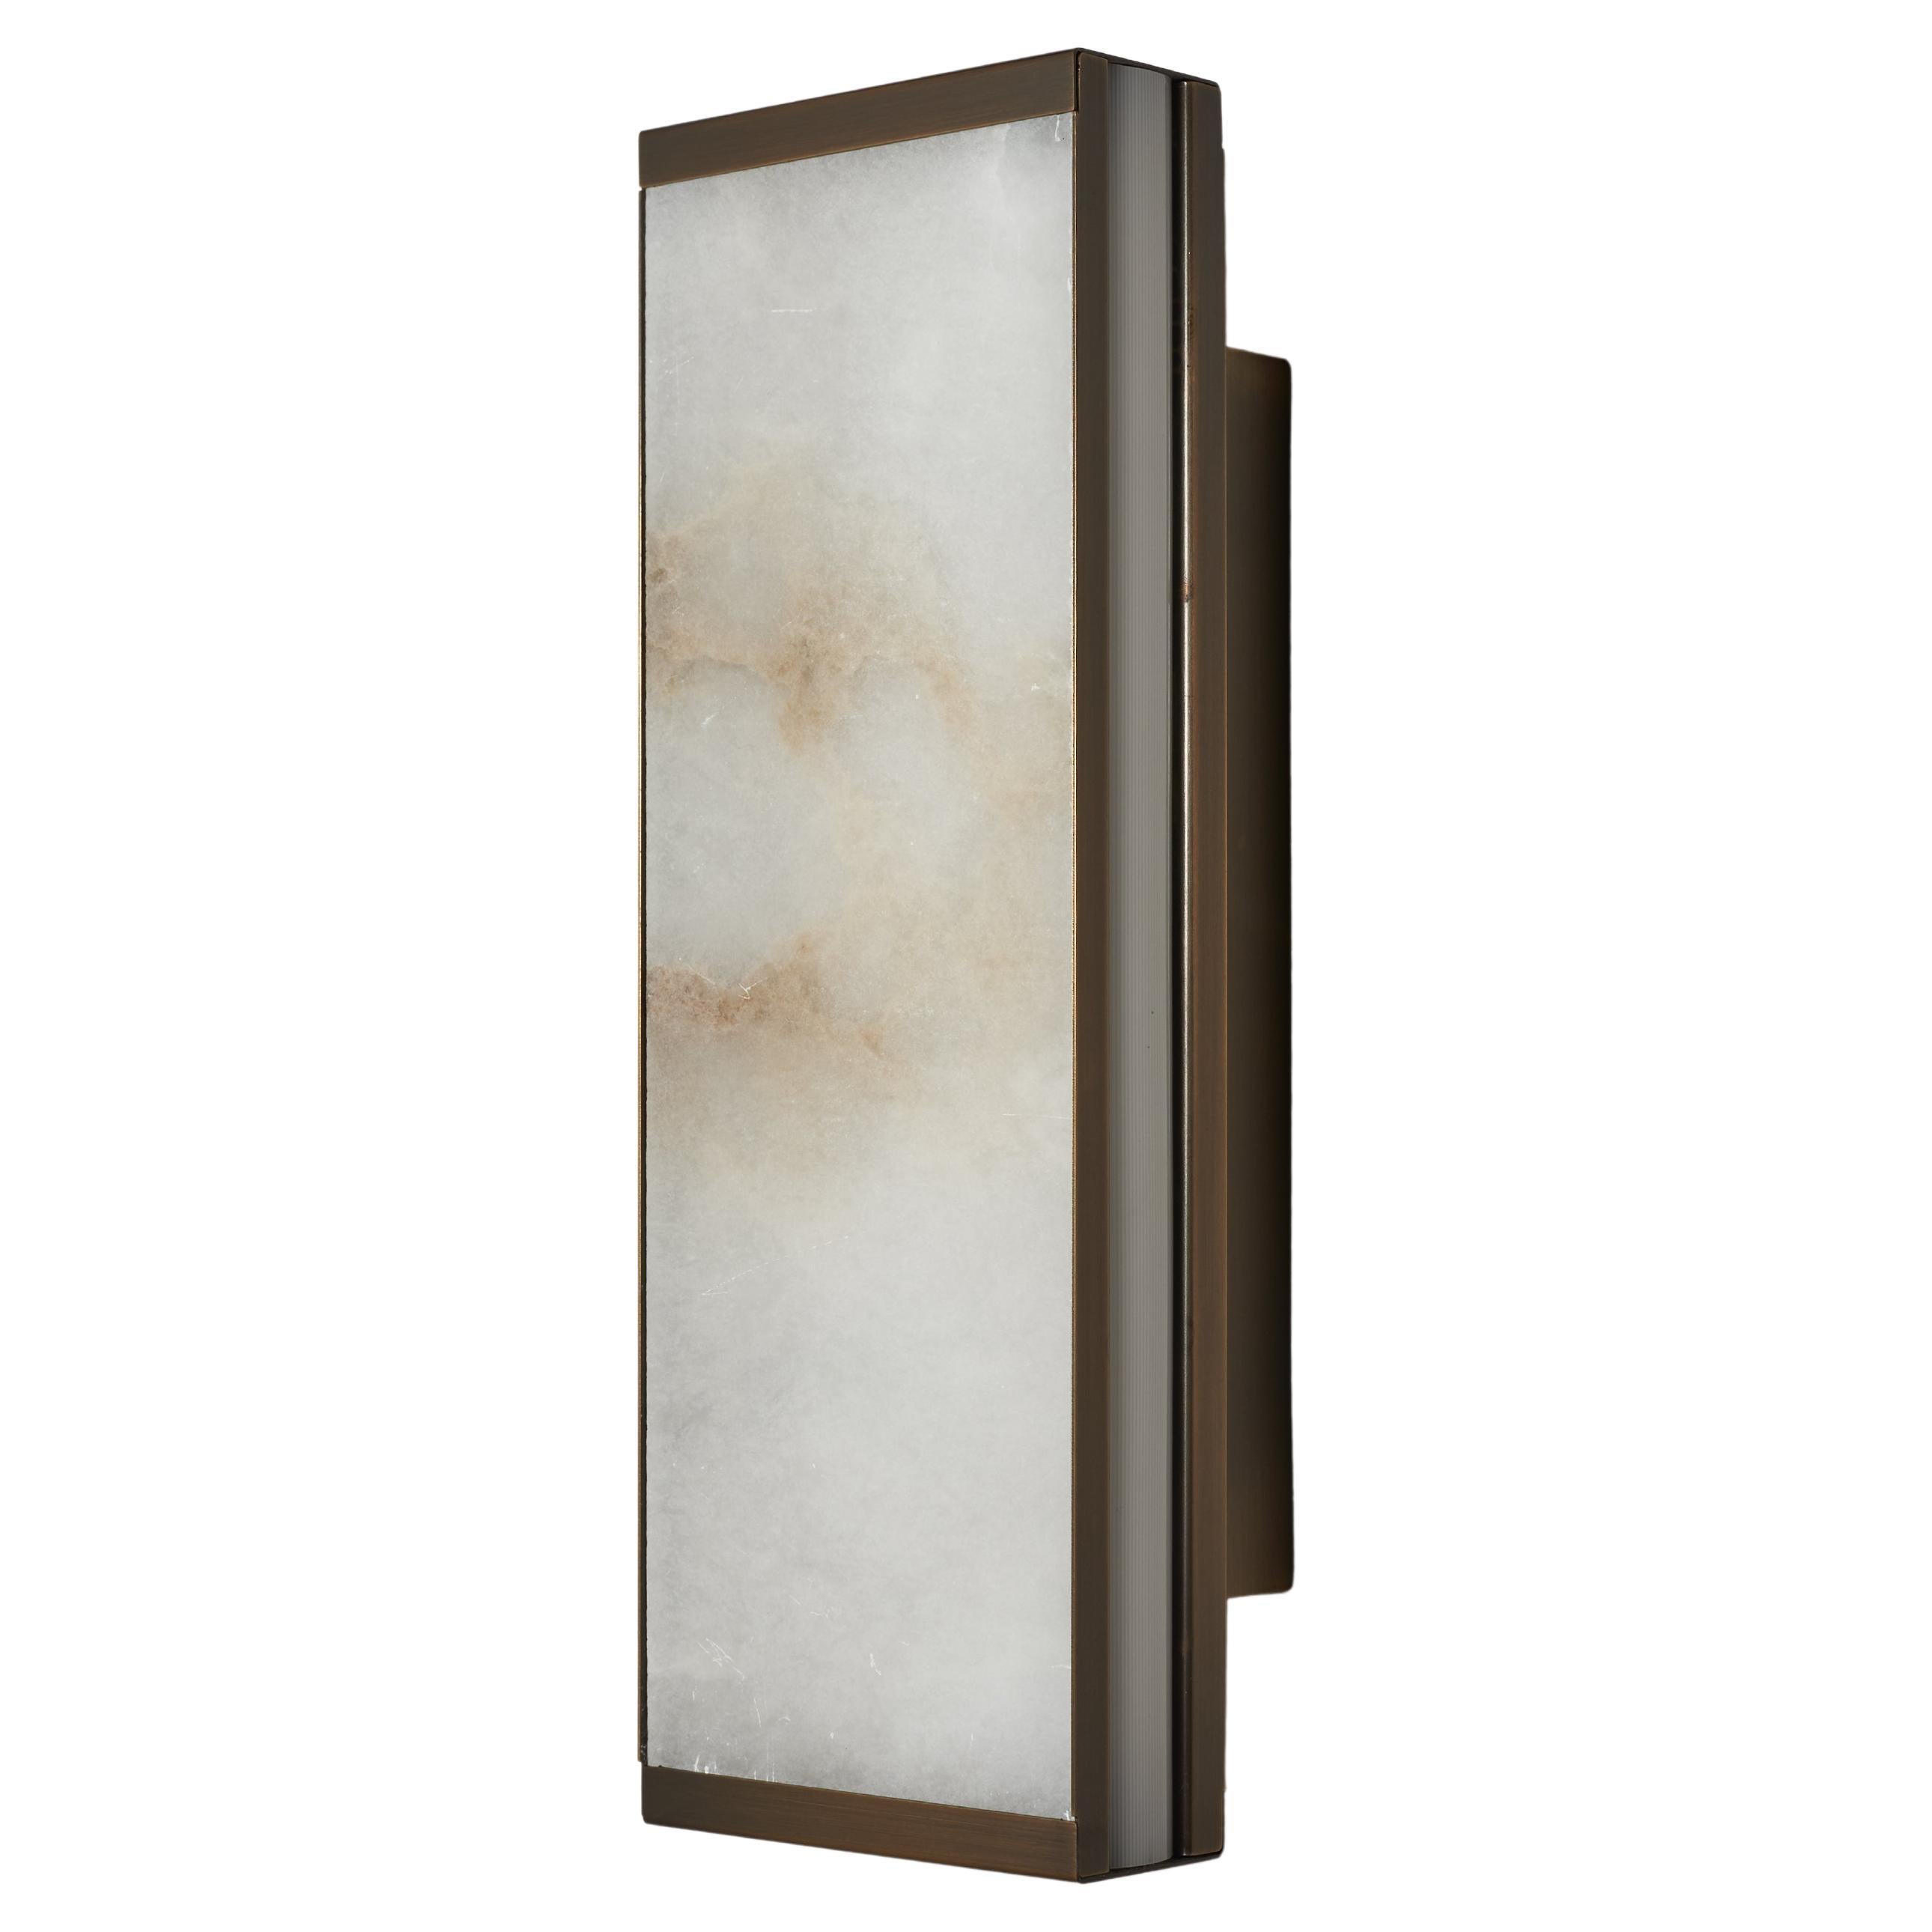 Essential Italian Alabaster Wall Sconce "Tech" For Sale